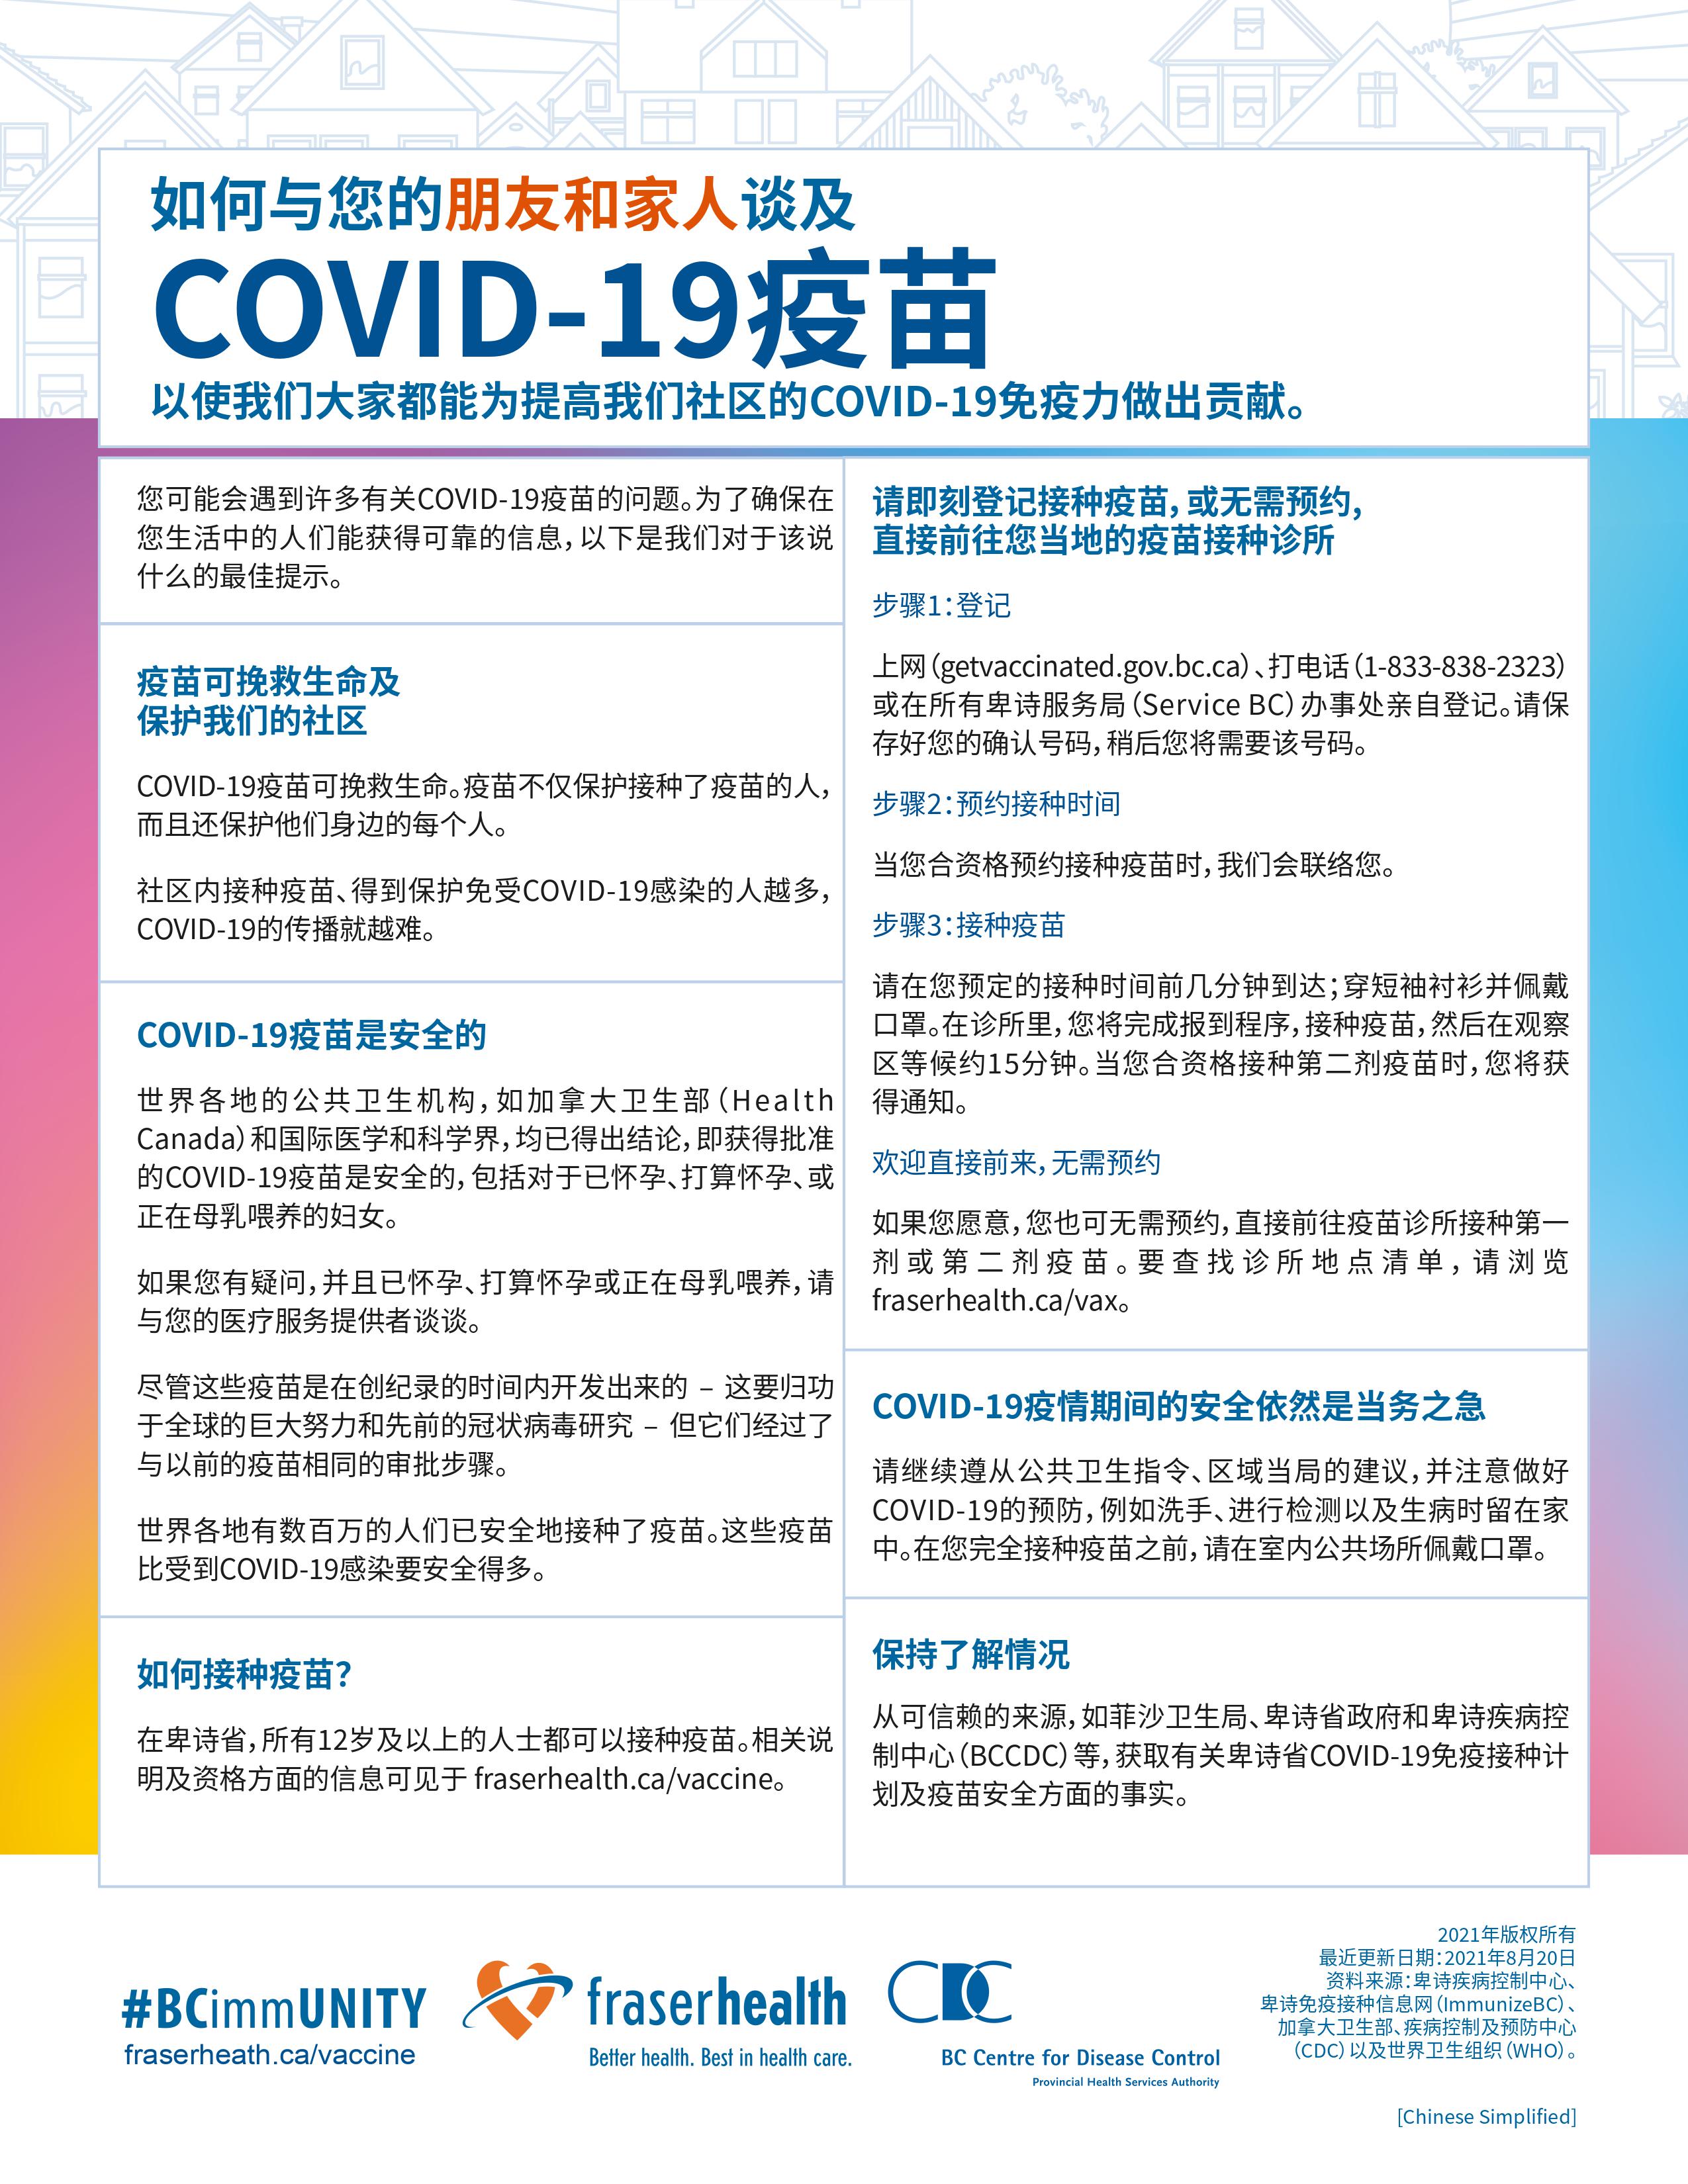 Infographic on how to talk to your friends about COVID-19 vaccines in Simplified Chinese